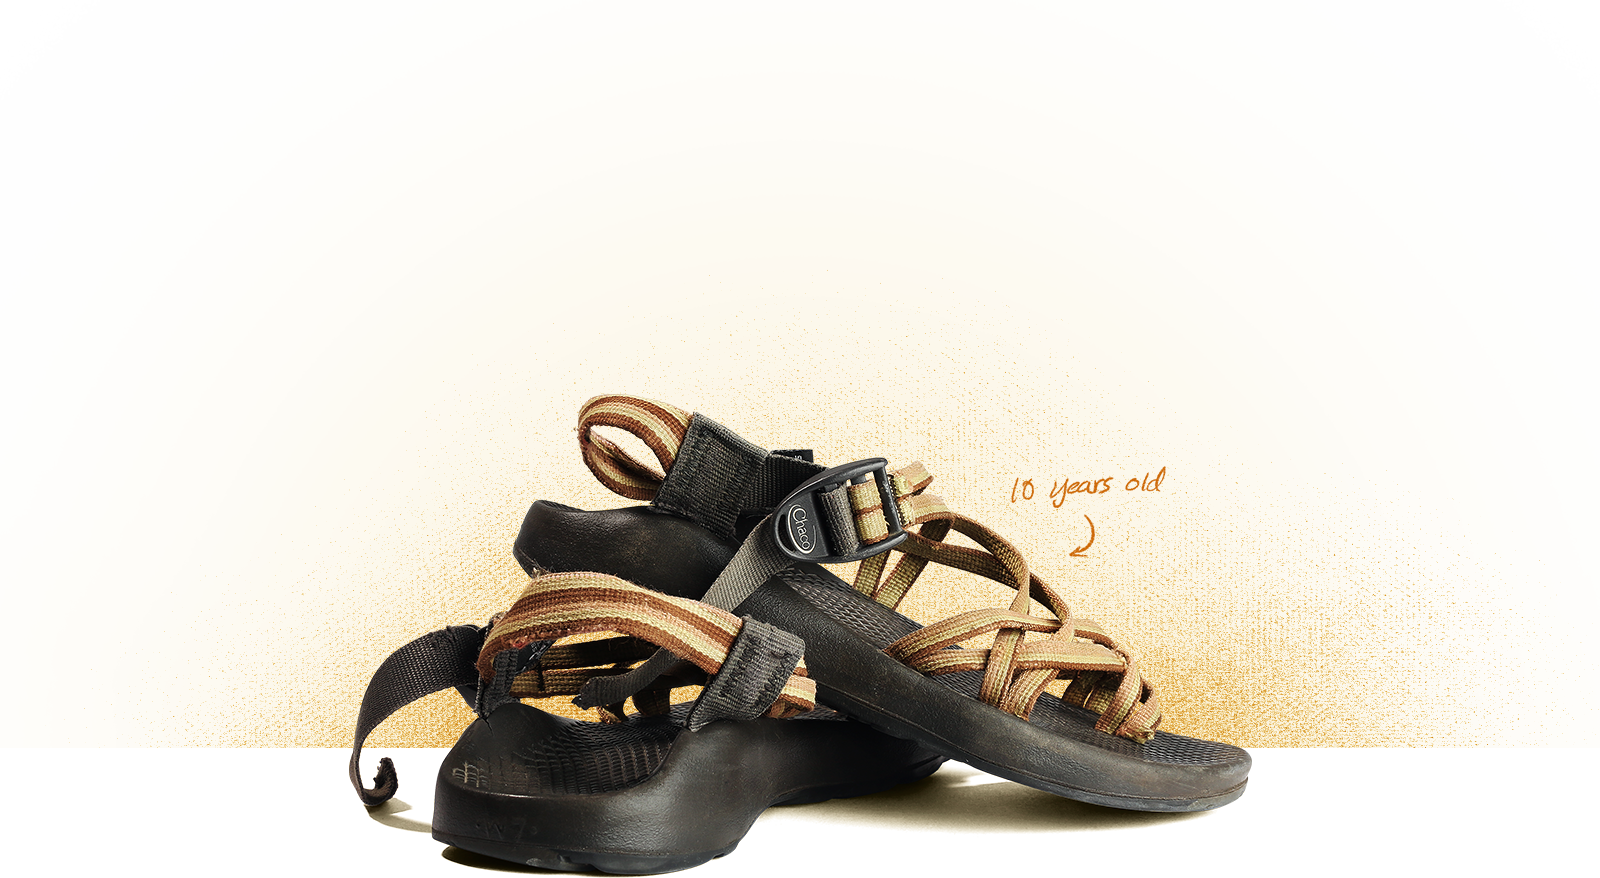 Chaco Sandal that is 10 years old.